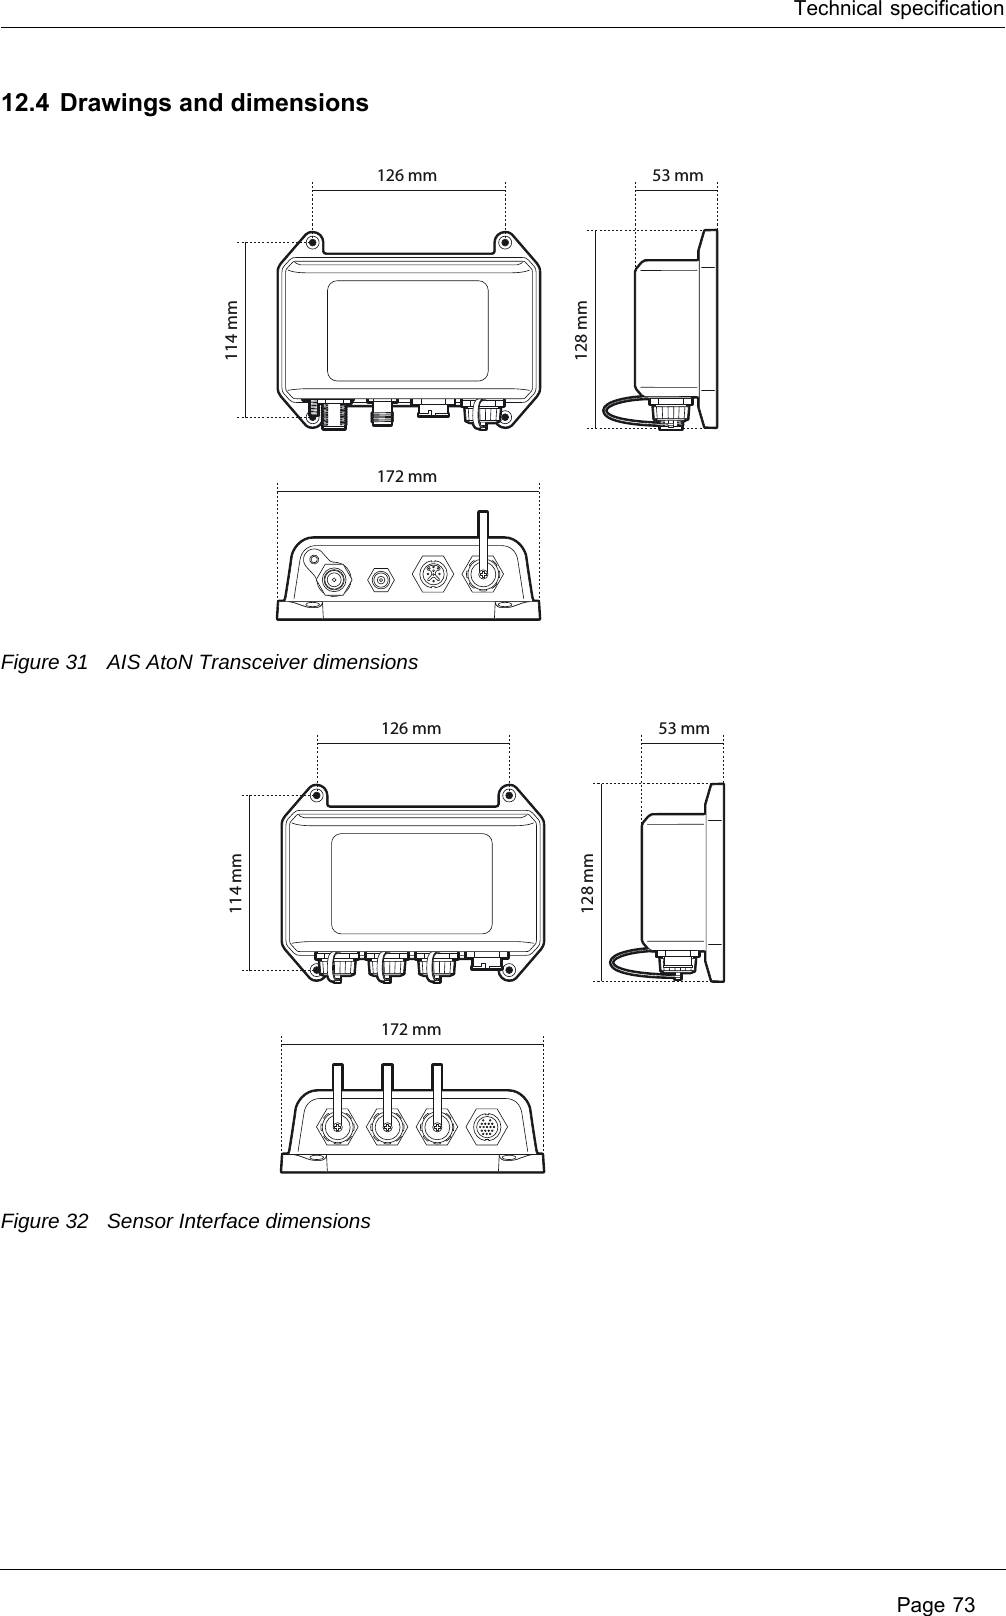 Technical specification Page 7312.4 Drawings and dimensionsFigure 31 AIS AtoN Transceiver dimensionsFigure 32 Sensor Interface dimensions53 mm128 mm126 mm172 mm114 mm53 mm128 mm126 mm172 mm114 mm